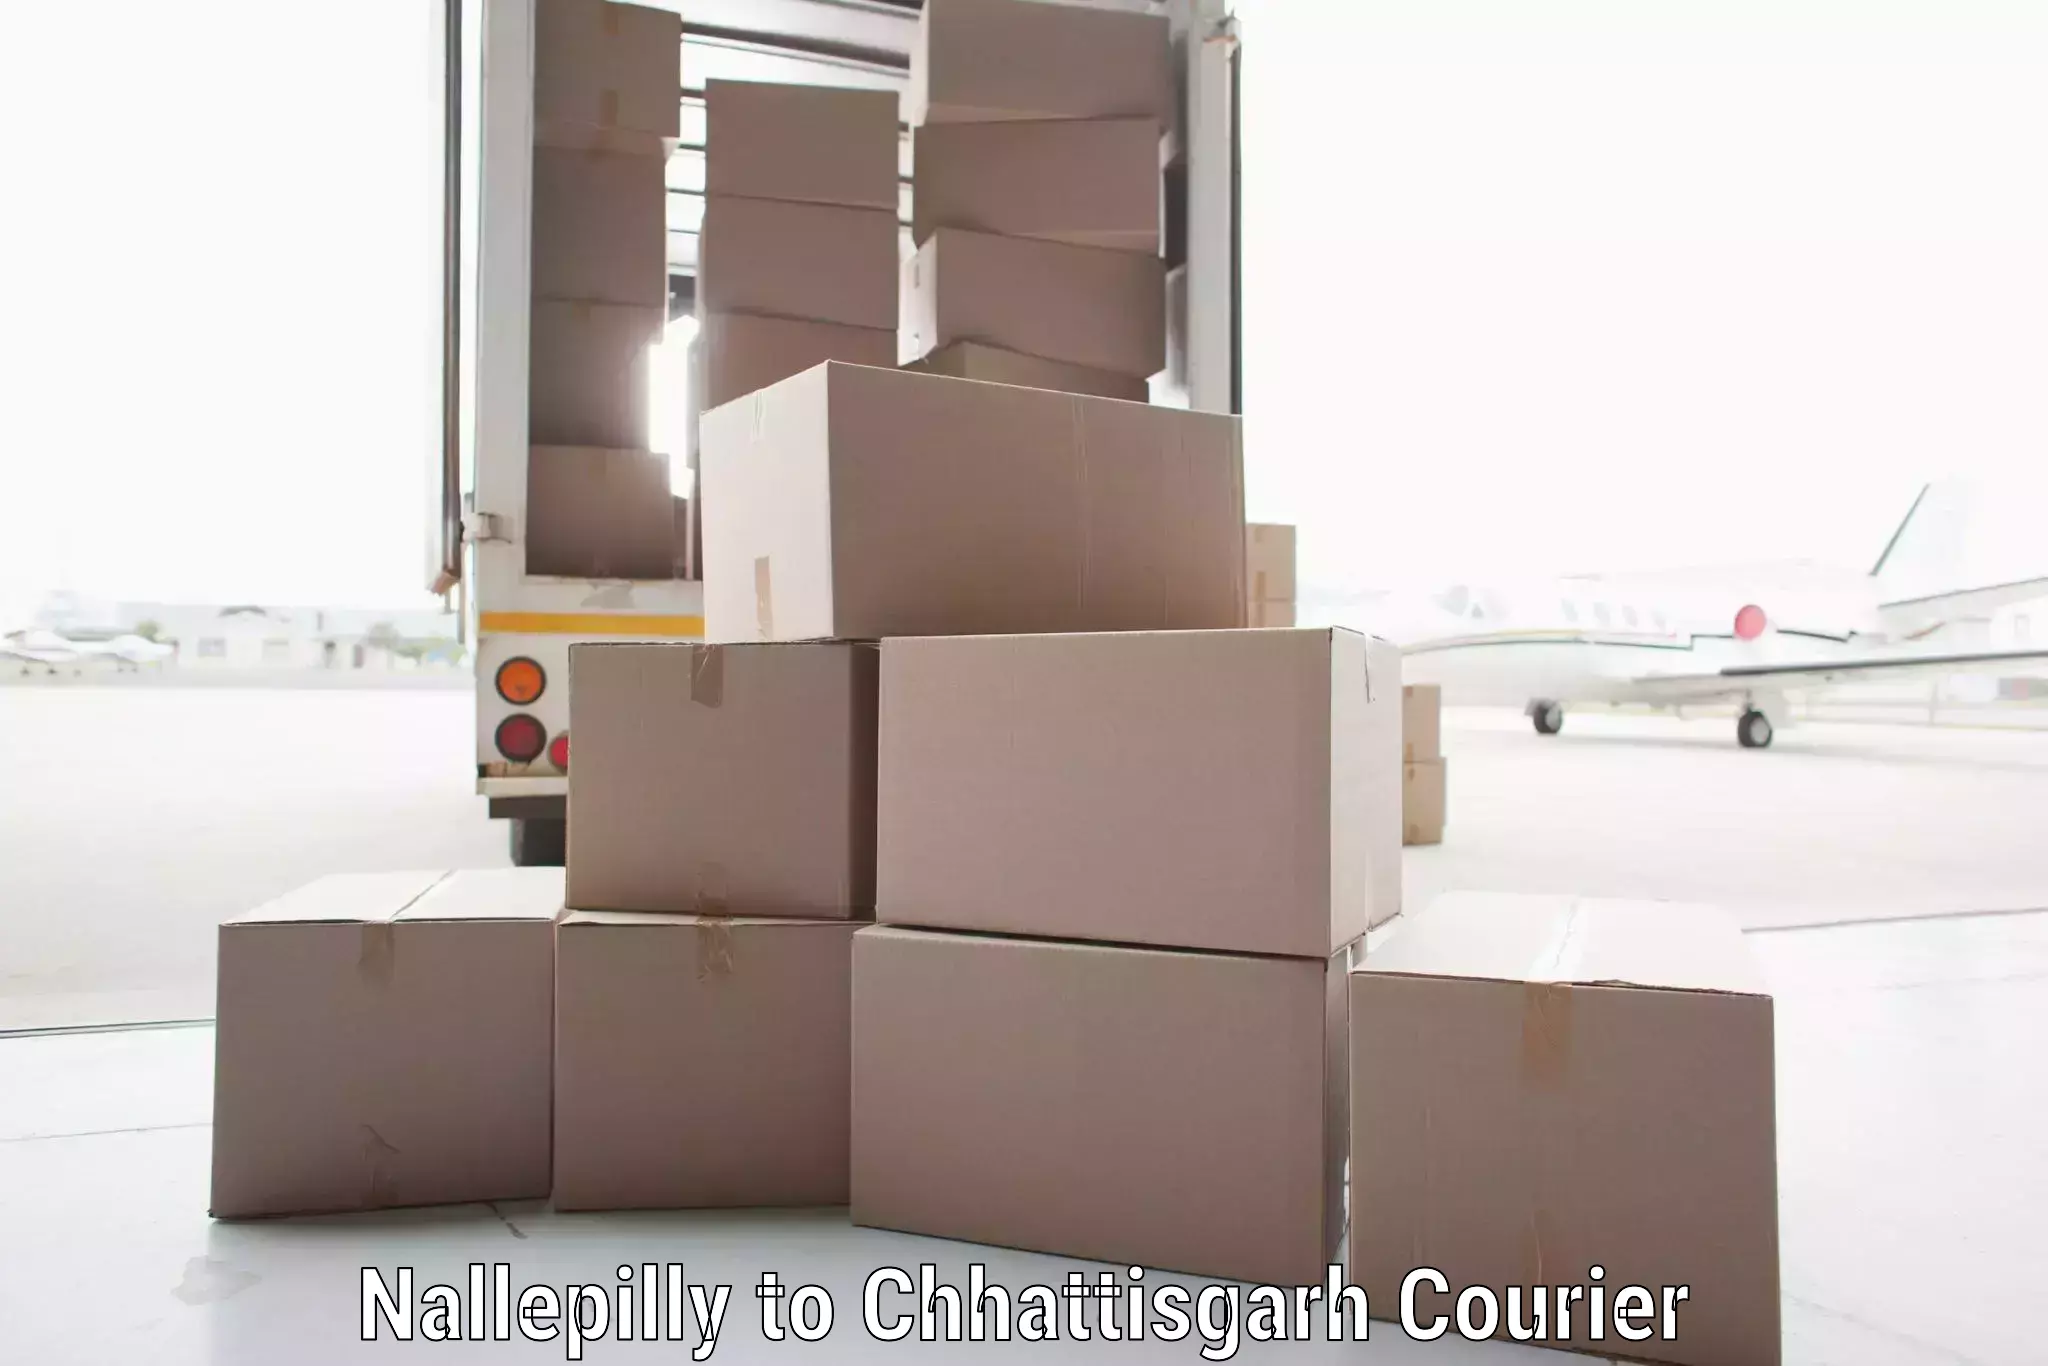 Nationwide courier service Nallepilly to bagbahra